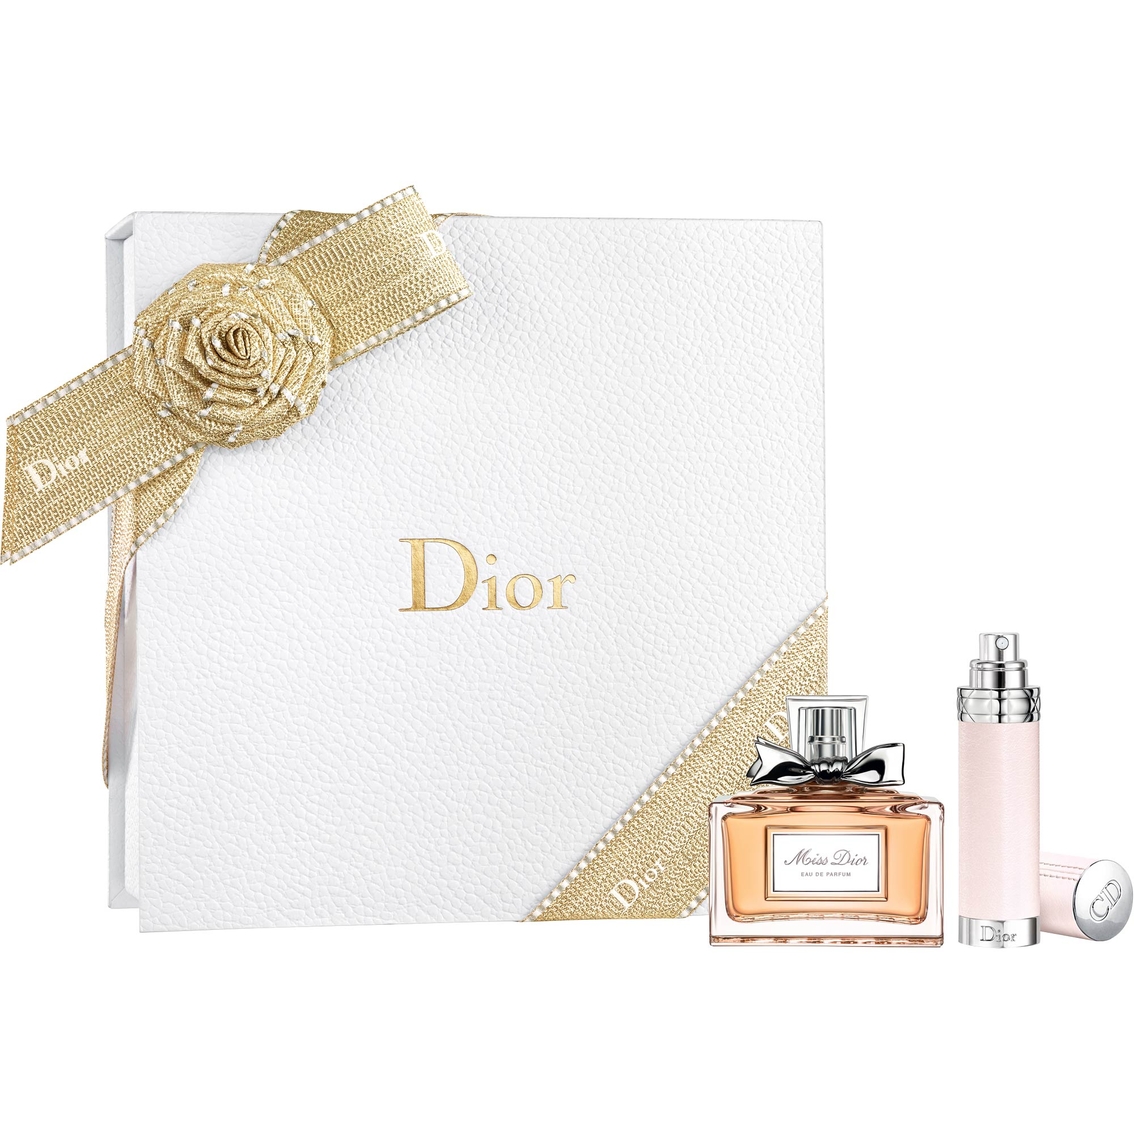 Dior Miss Dior Set Gifts Sets For Her Holiday Gift Guide Shop The